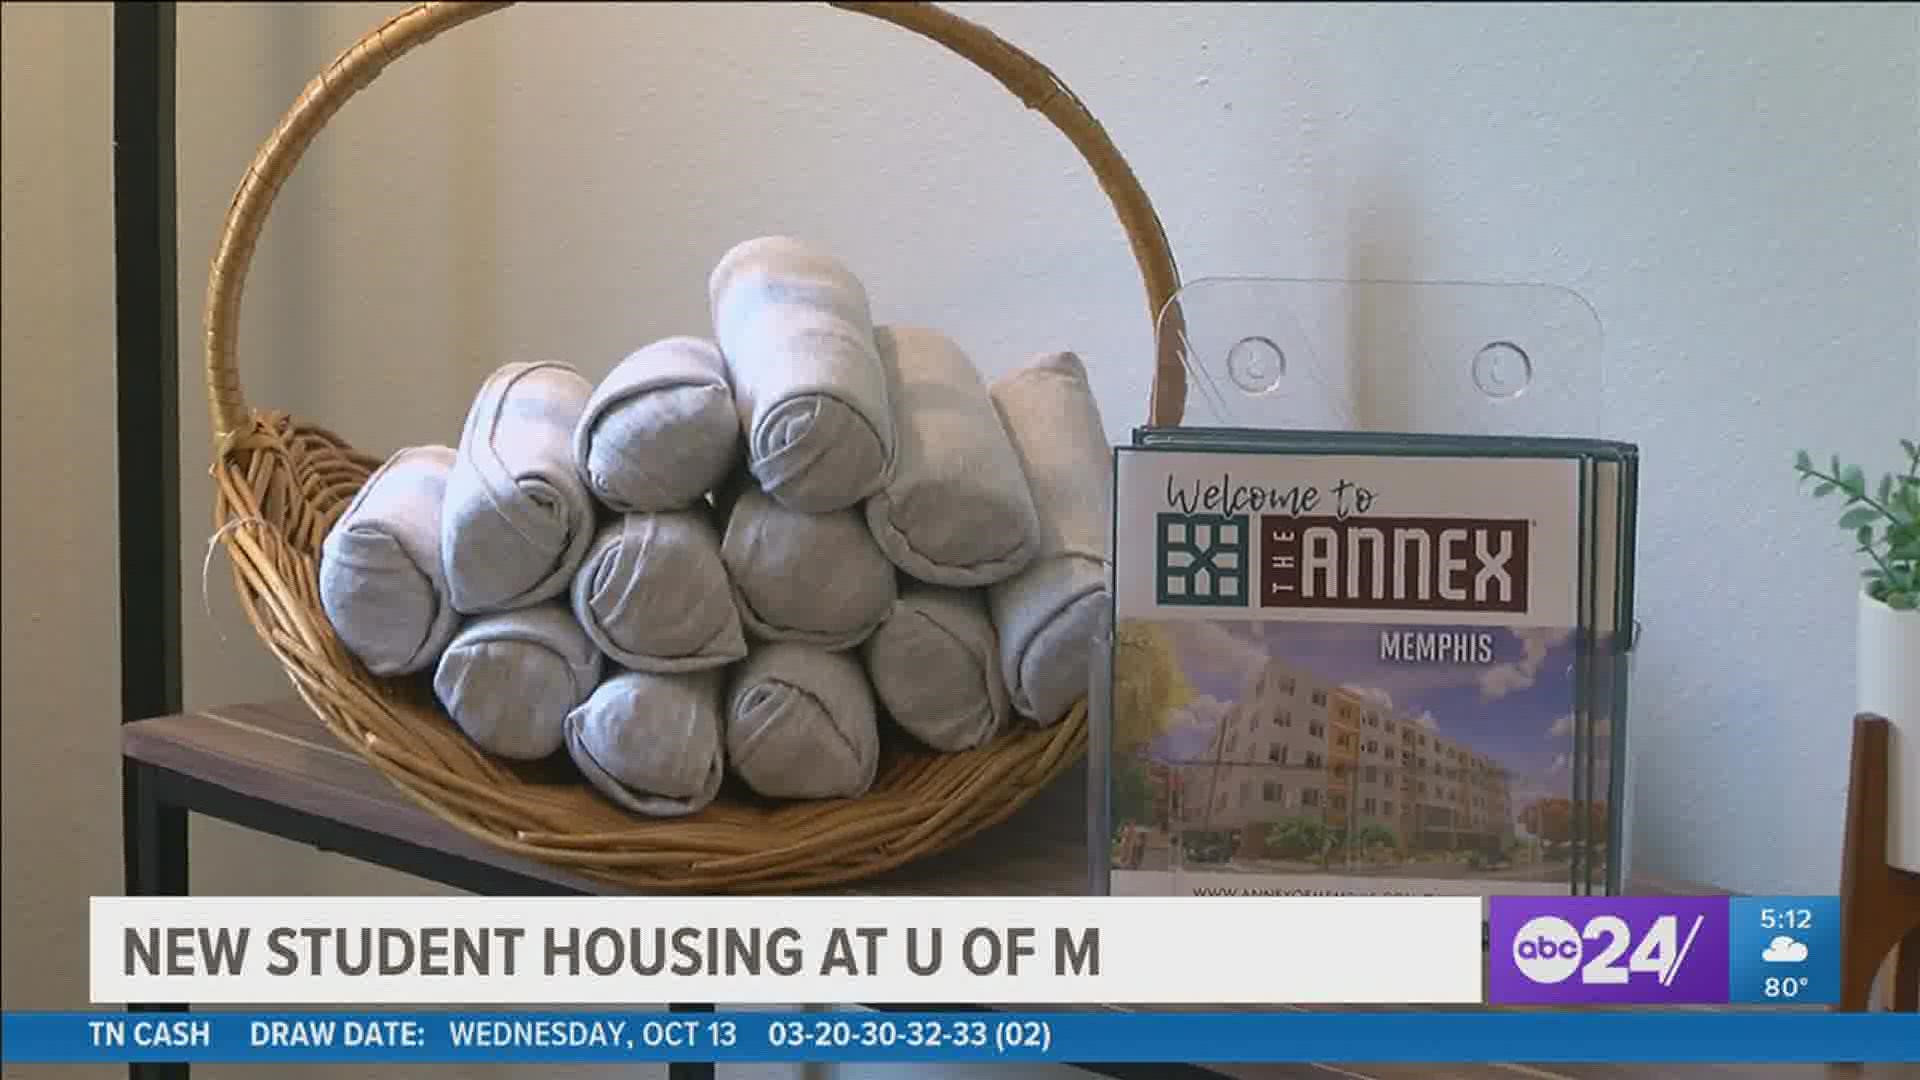 A ribbon cutting ceremony was held for the Annex of Memphis, which will provide homes closer to campus.